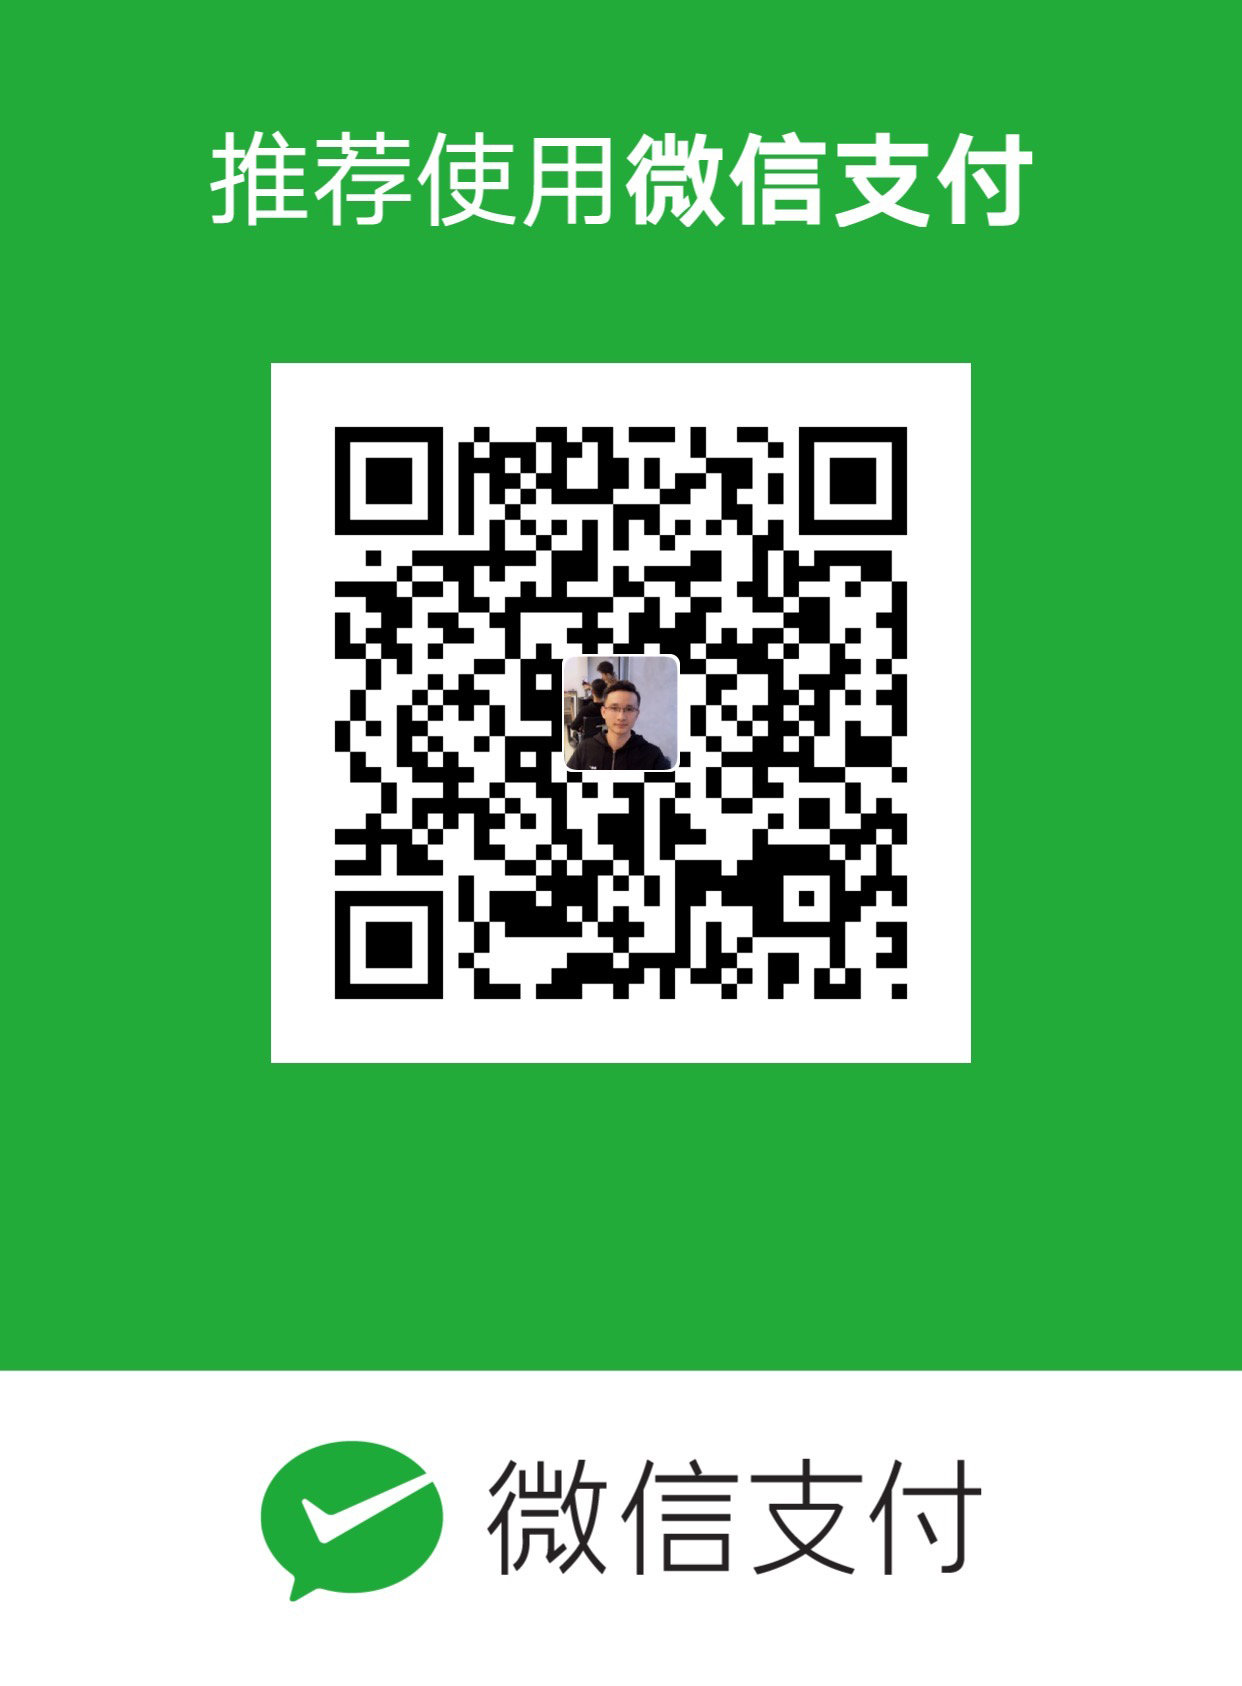 TKVERN WeChat Pay